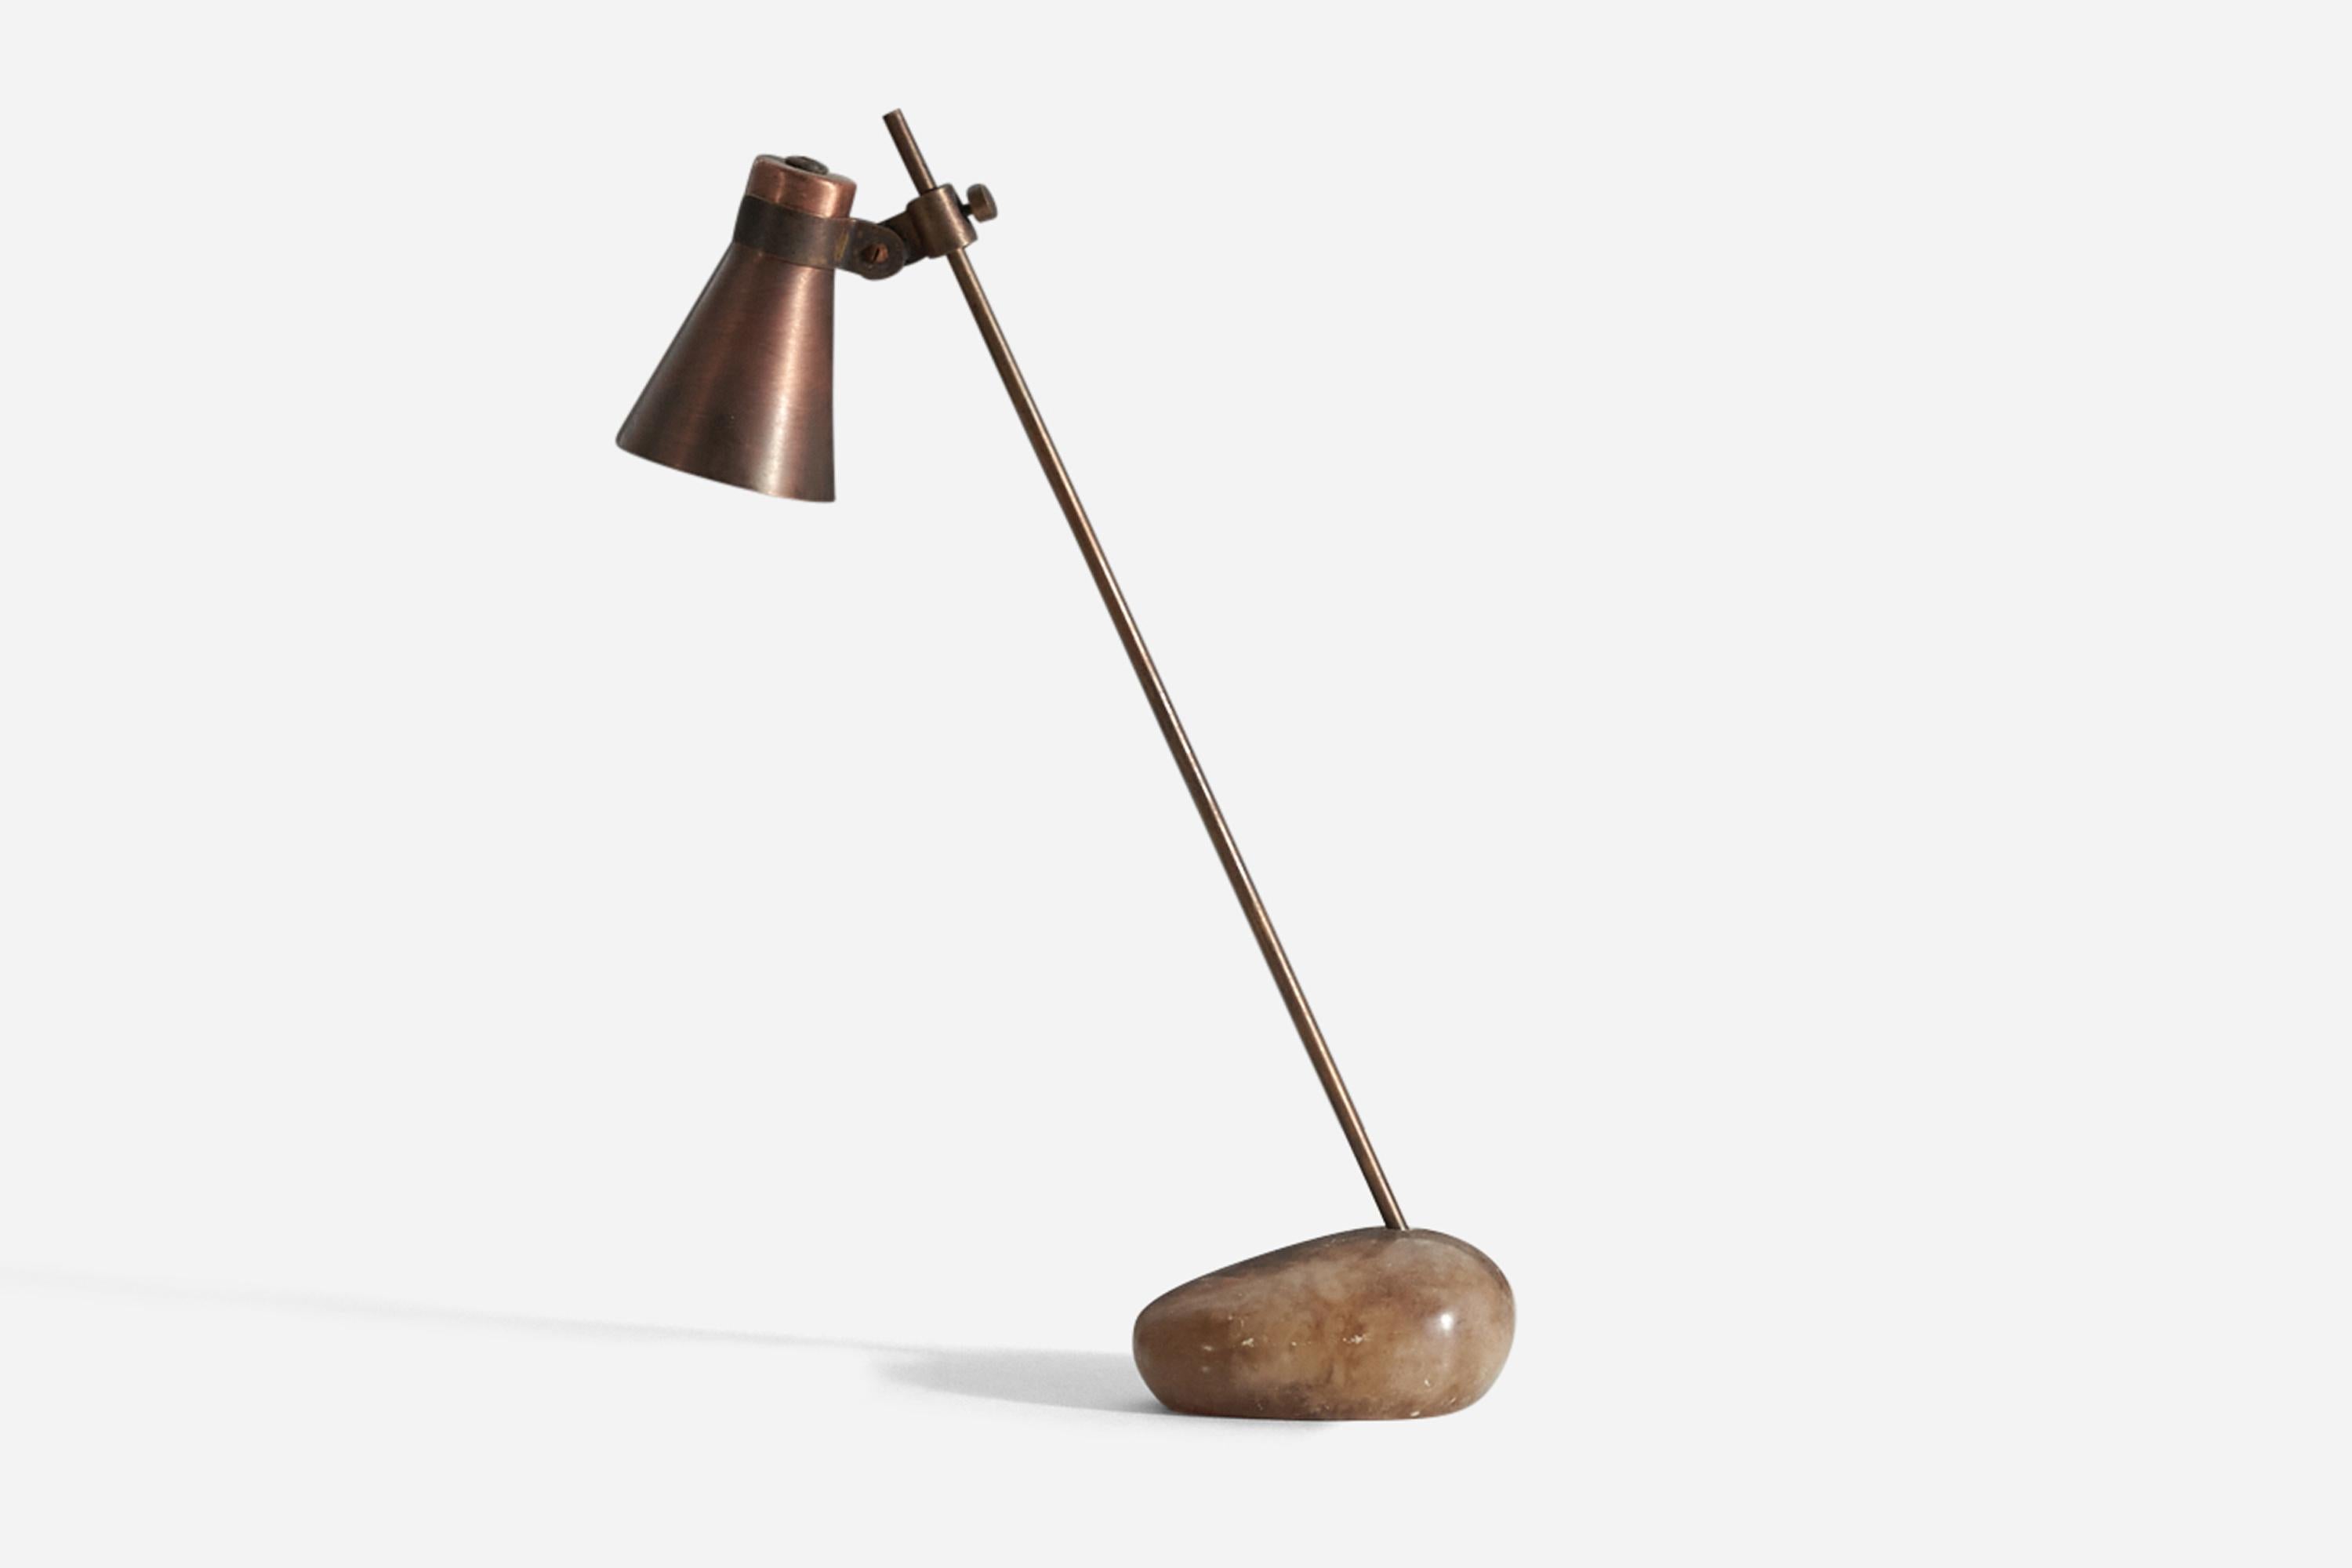 A rare and early ‘Sasso’ table lamp designed by Luigi Caccia Dominioni and produced by Azucena, Milan, Italy, c. 1948. The lamp is composed of a brass stem standing in a polished Iranian river stone base, with a lacquered brass metal lampshade.
 